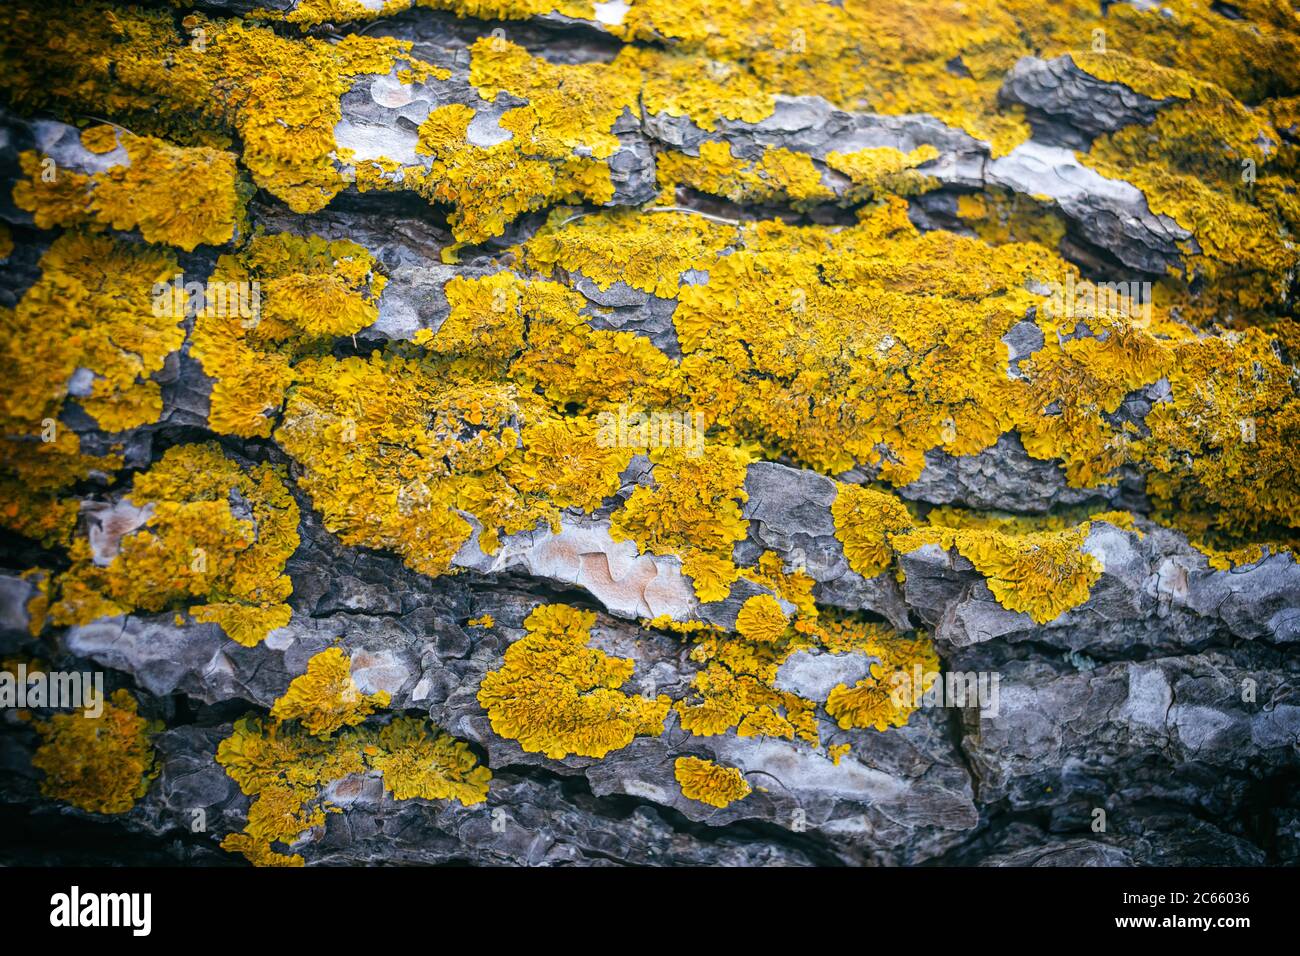 Lichen, fungus on tree trunk background. The common orange lichen plant, yellow scale covers a tree bark. Wallpaper, close up nature background, textu Stock Photo